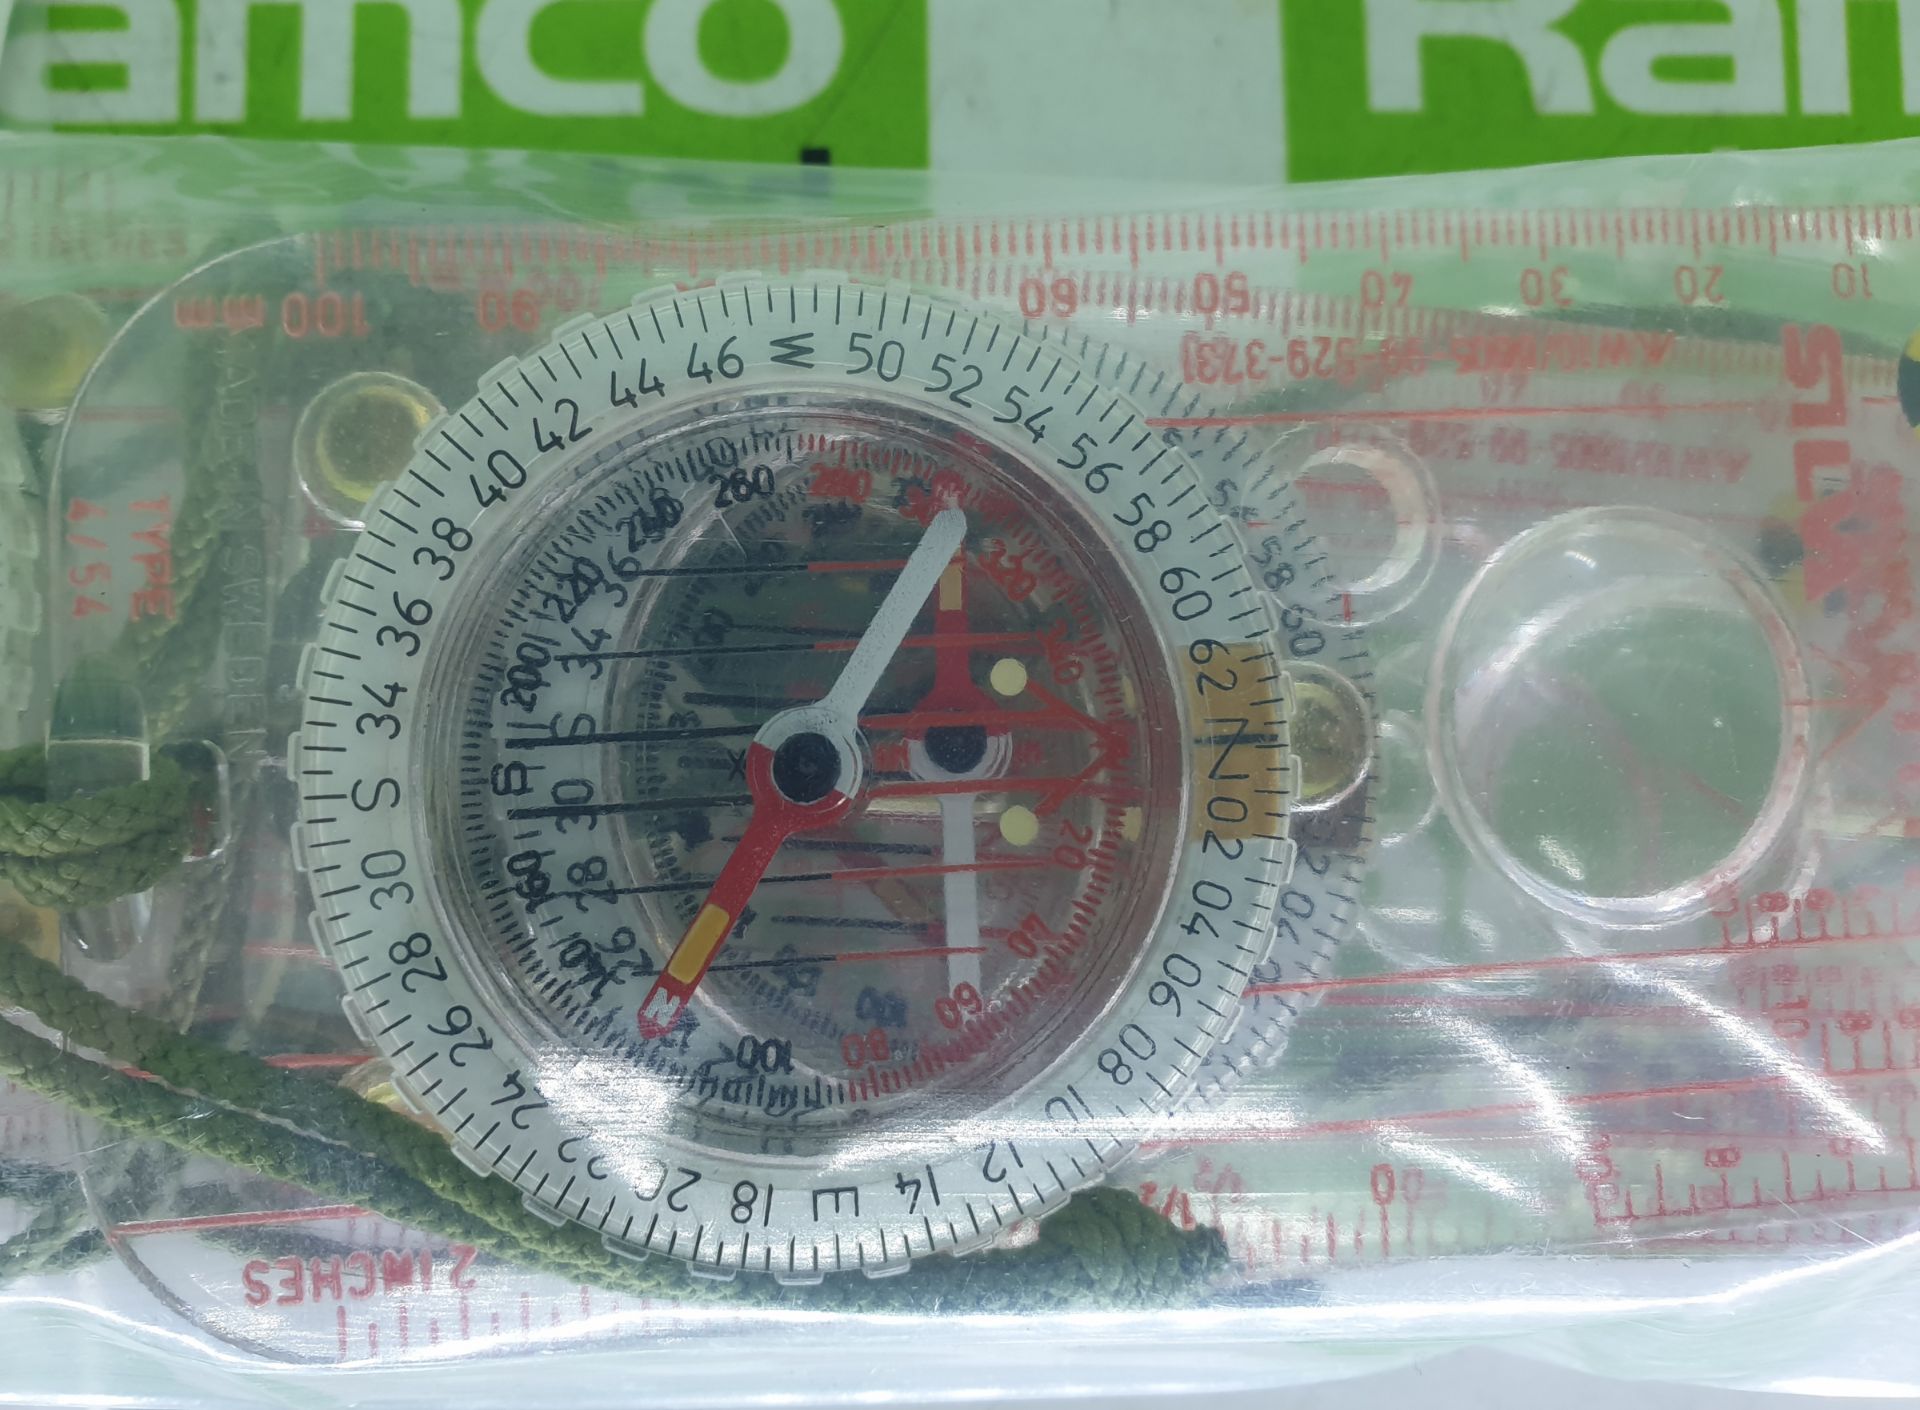 5x Silva Expedition 4 compasses - Image 2 of 3